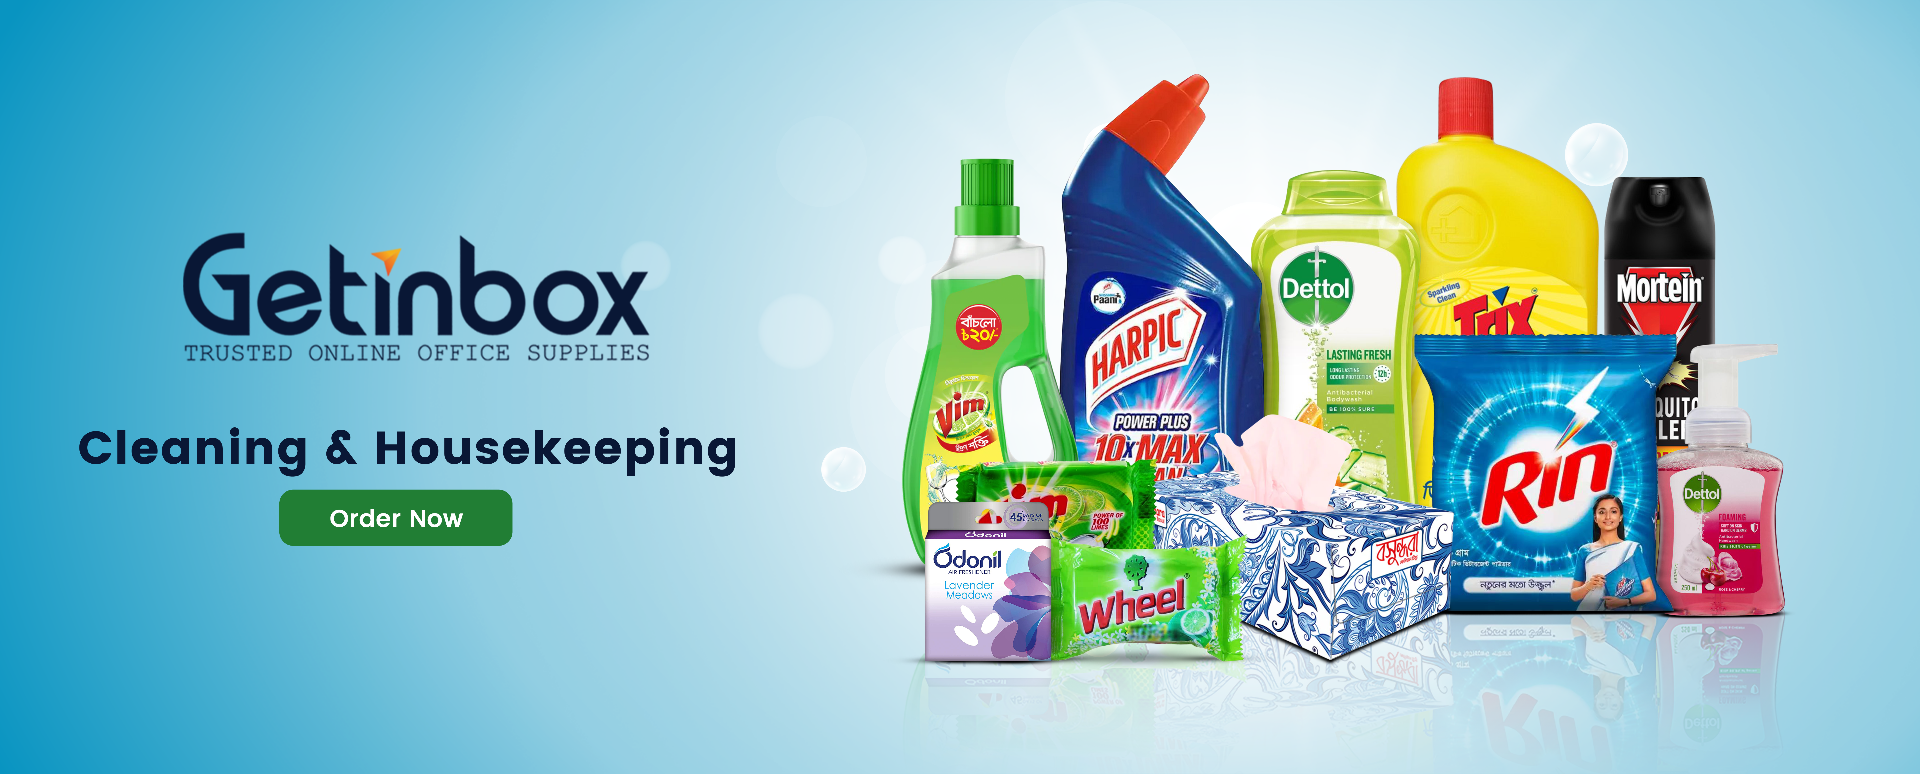 Getinbox Cleaning and Housekeeping Supplies